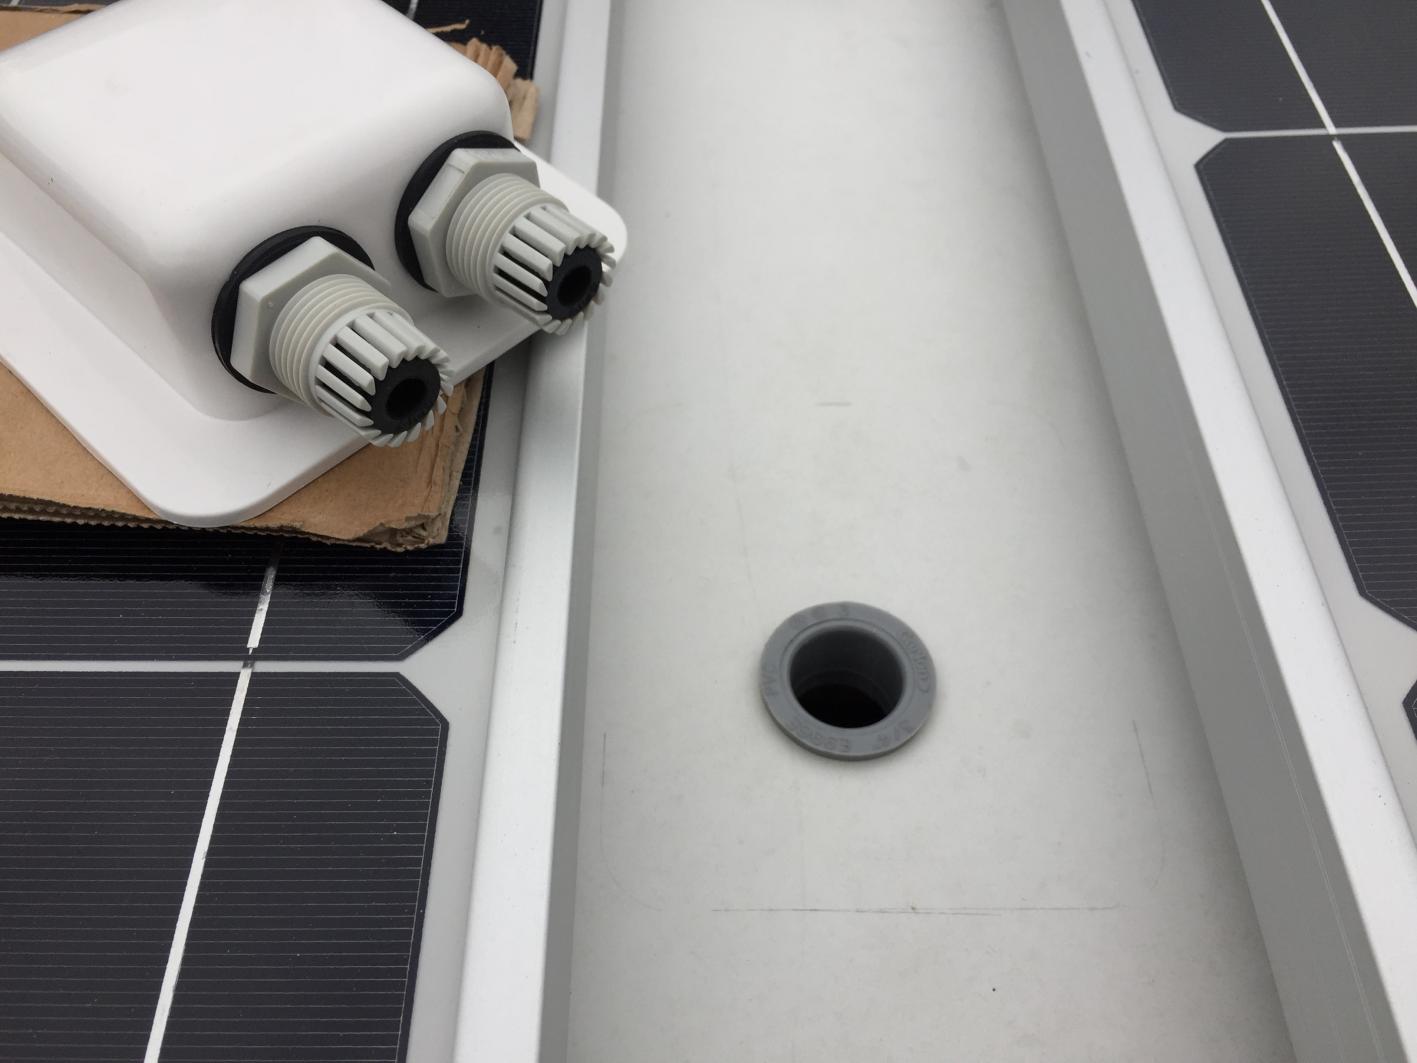 Installing roof cable entry plate for solar panels. Used an electrical or PVC piece in the hole so there's no sharp edge on the cables.